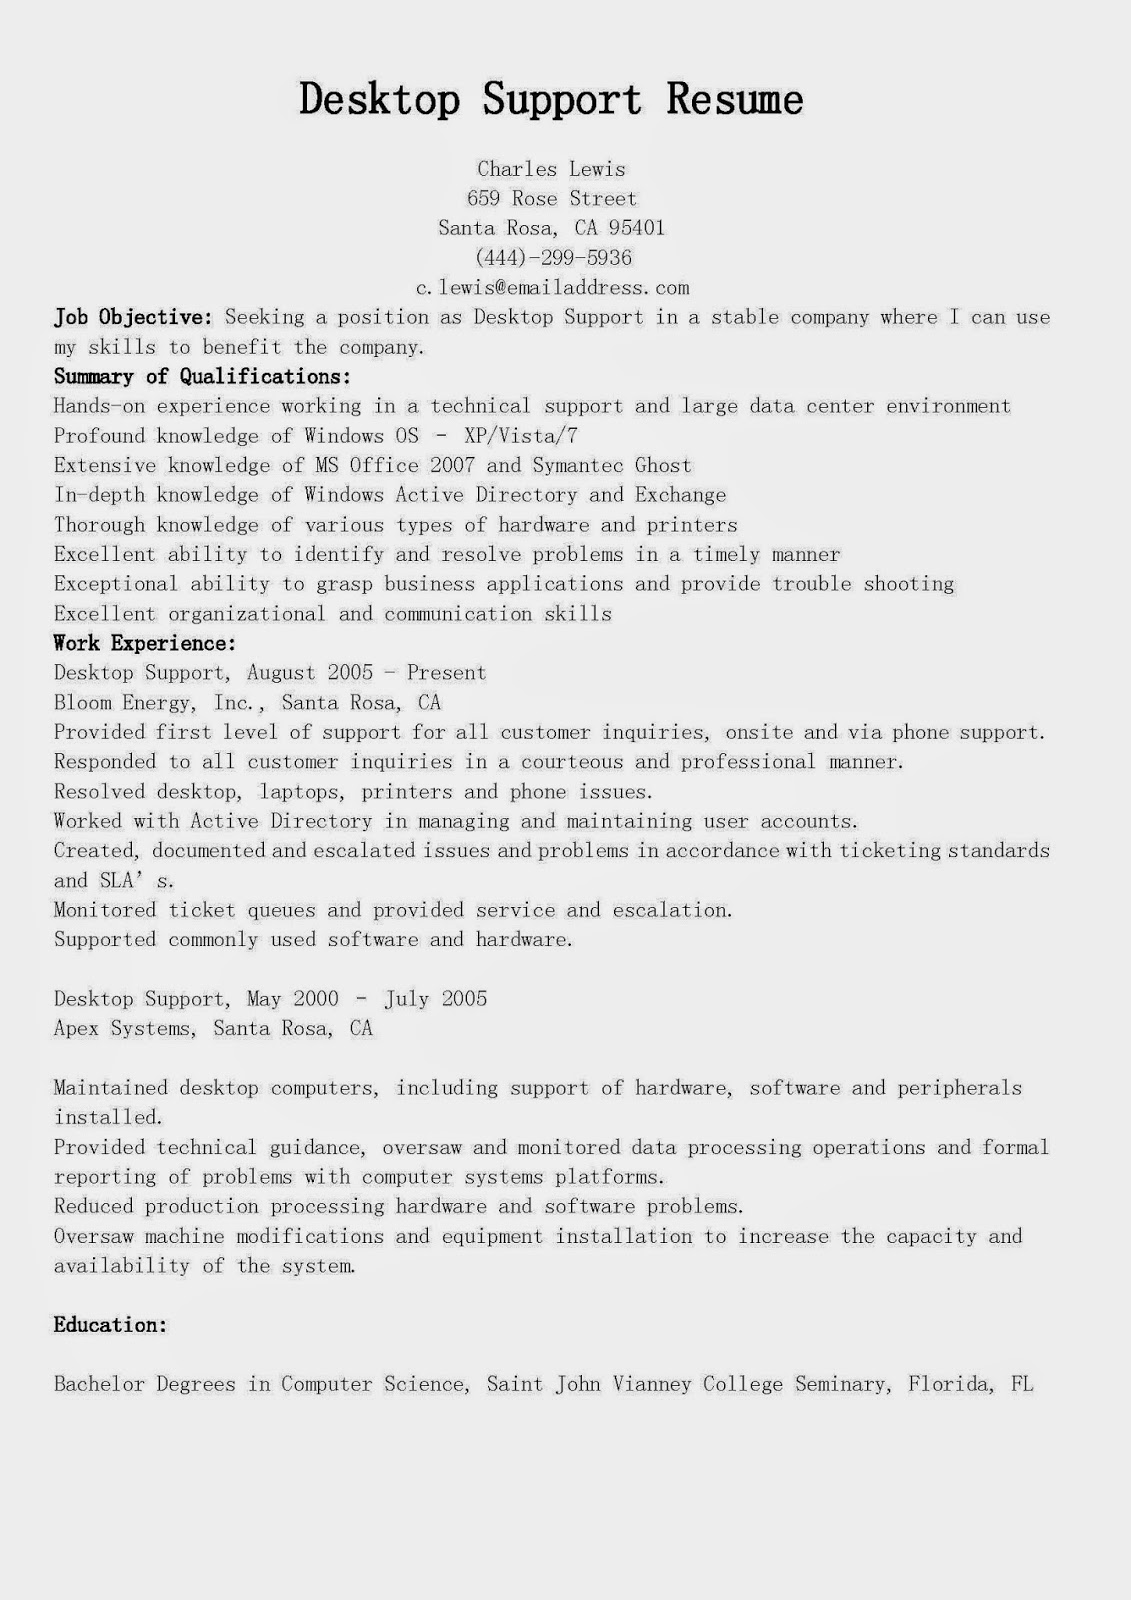 Pc systems specialist resume